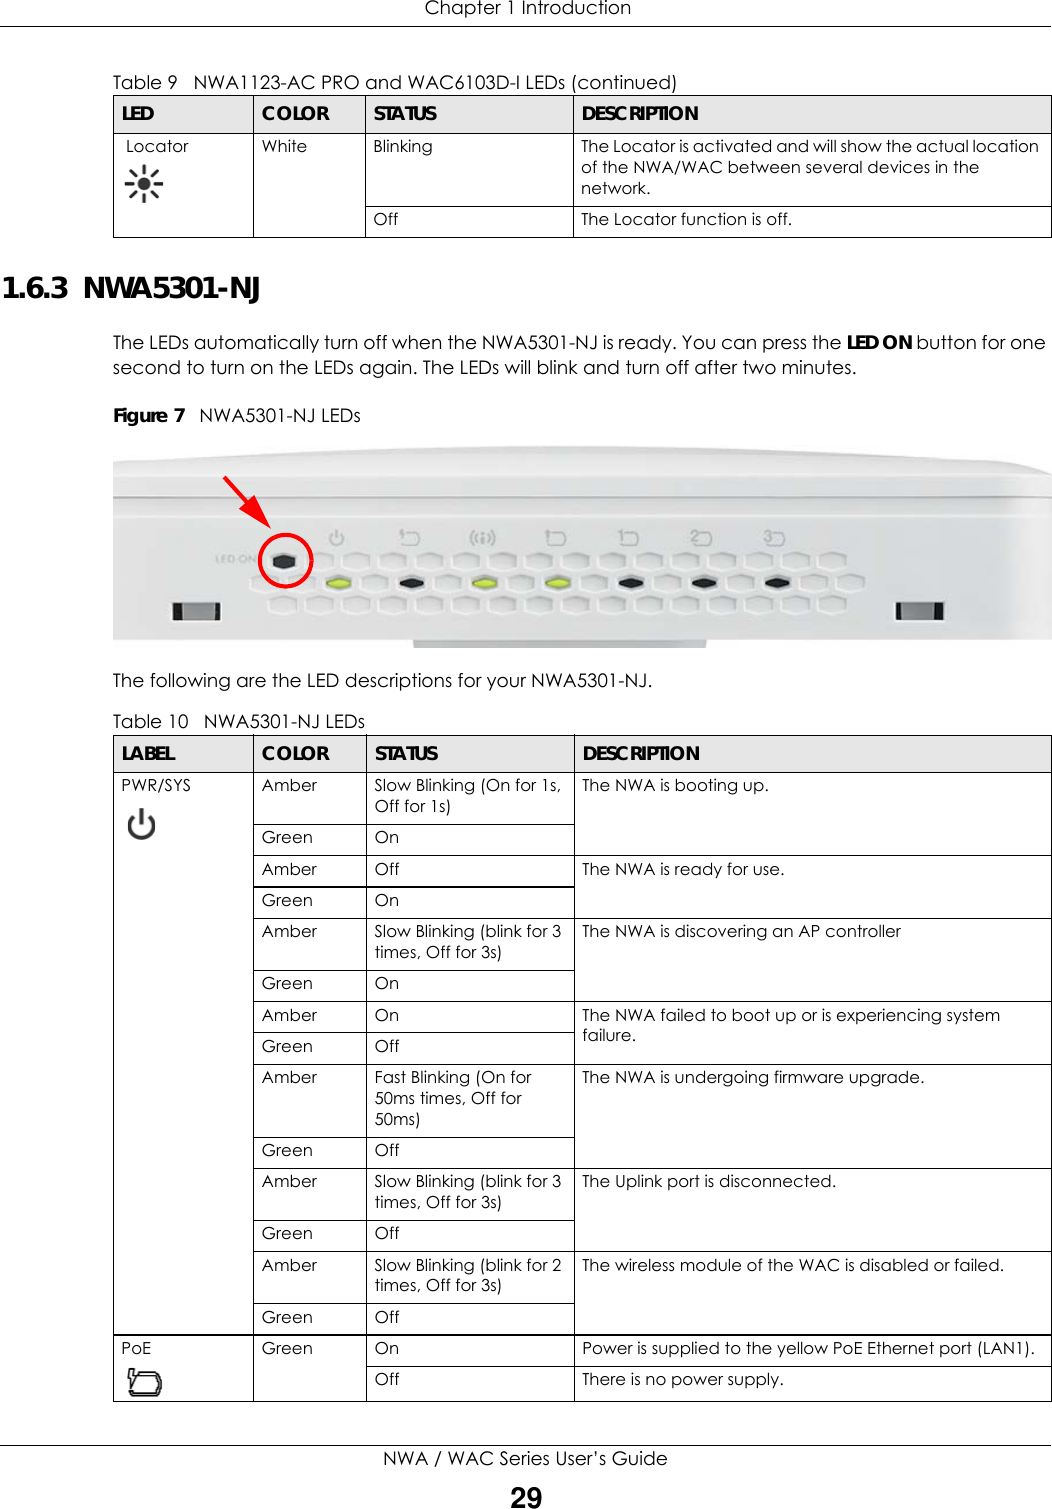  Chapter 1 IntroductionNWA / WAC Series User’s Guide291.6.3  NWA5301-NJThe LEDs automatically turn off when the NWA5301-NJ is ready. You can press the LED ON button for one second to turn on the LEDs again. The LEDs will blink and turn off after two minutes.Figure 7   NWA5301-NJ LEDs The following are the LED descriptions for your NWA5301-NJ.  Locator White Blinking The Locator is activated and will show the actual location of the NWA/WAC between several devices in the network.Off The Locator function is off.Table 9   NWA1123-AC PRO and WAC6103D-I LEDs (continued)LED COLOR STATUS DESCRIPTIONTable 10   NWA5301-NJ LEDsLABEL COLOR STATUS DESCRIPTIONPWR/SYS  Amber Slow Blinking (On for 1s, Off for 1s)The NWA is booting up.Green OnAmber Off The NWA is ready for use.Green OnAmber Slow Blinking (blink for 3 times, Off for 3s)The NWA is discovering an AP controllerGreen OnAmber On The NWA failed to boot up or is experiencing system failure.Green OffAmber Fast Blinking (On for 50ms times, Off for 50ms)The NWA is undergoing firmware upgrade. Green OffAmber Slow Blinking (blink for 3 times, Off for 3s)The Uplink port is disconnected.Green OffAmber Slow Blinking (blink for 2 times, Off for 3s)The wireless module of the WAC is disabled or failed.Green OffPoE Green On Power is supplied to the yellow PoE Ethernet port (LAN1).Off There is no power supply.